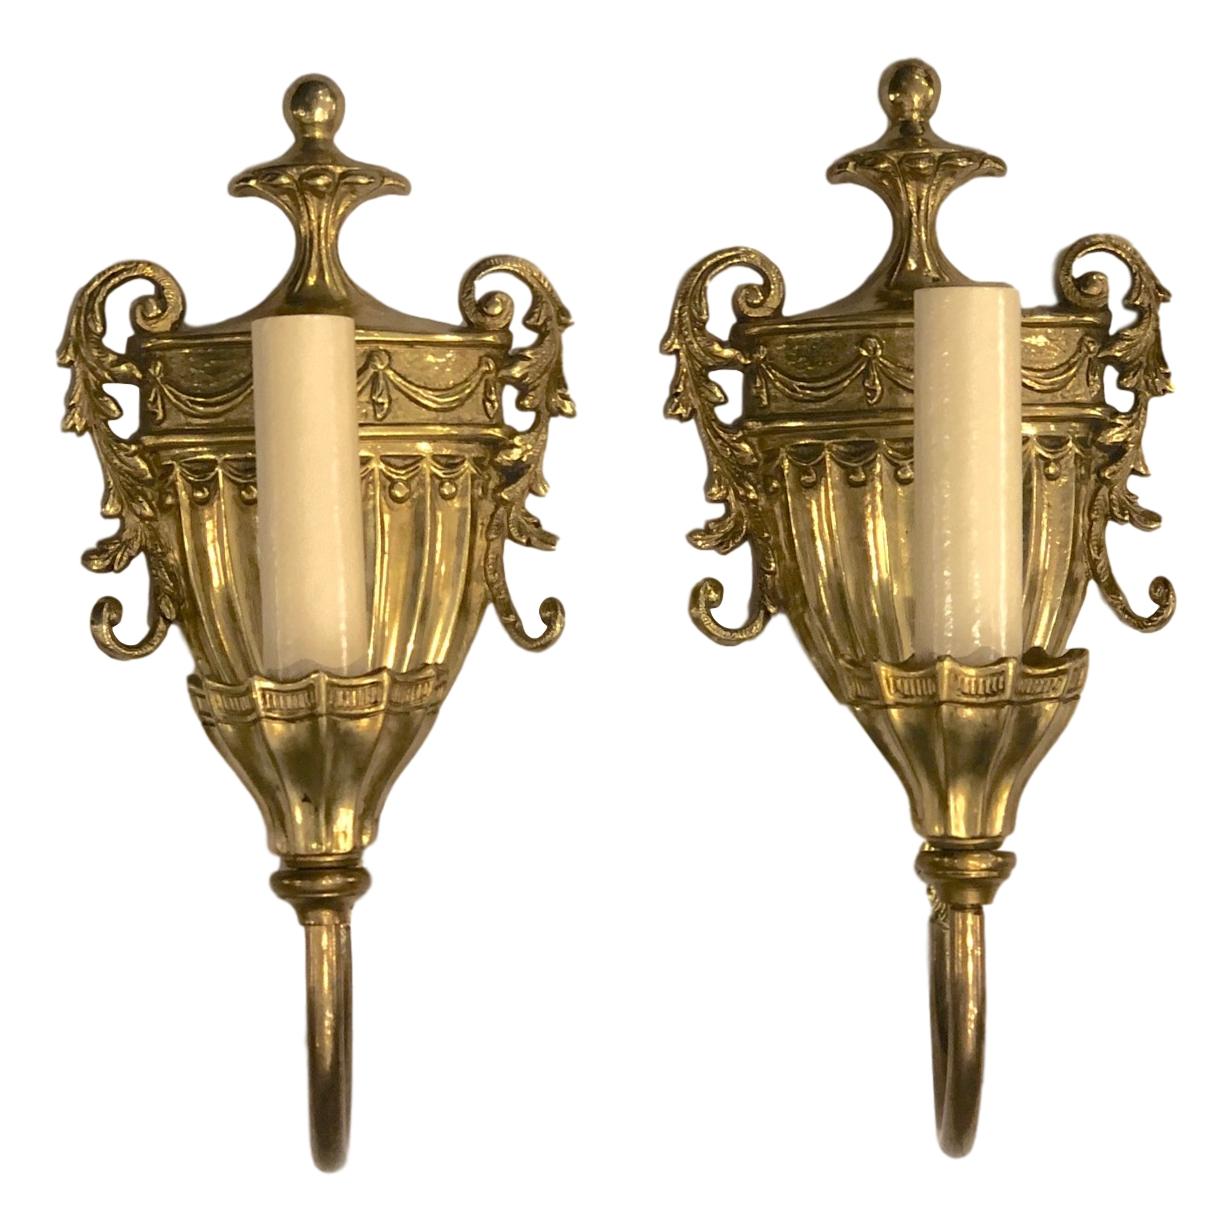 A set of 10 circa 1920s French bronze single-arm neoclassic style sconces. Sold per pair.

Measurements:
Height 10.5